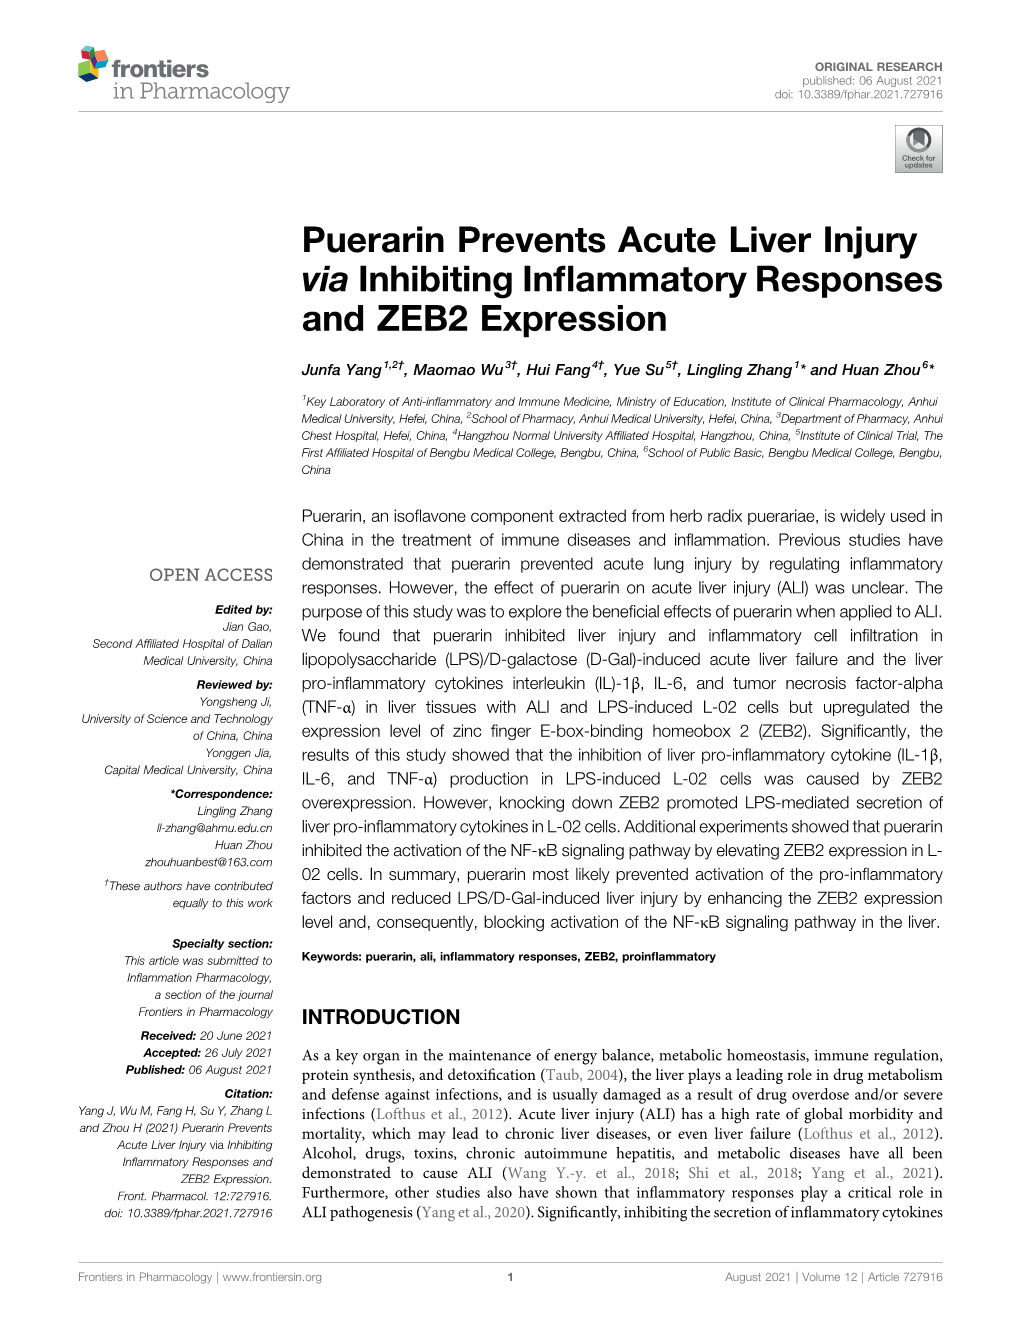 Puerarin Prevents Acute Liver Injury Via Inhibiting Inflammatory Responses and ZEB2 Expression